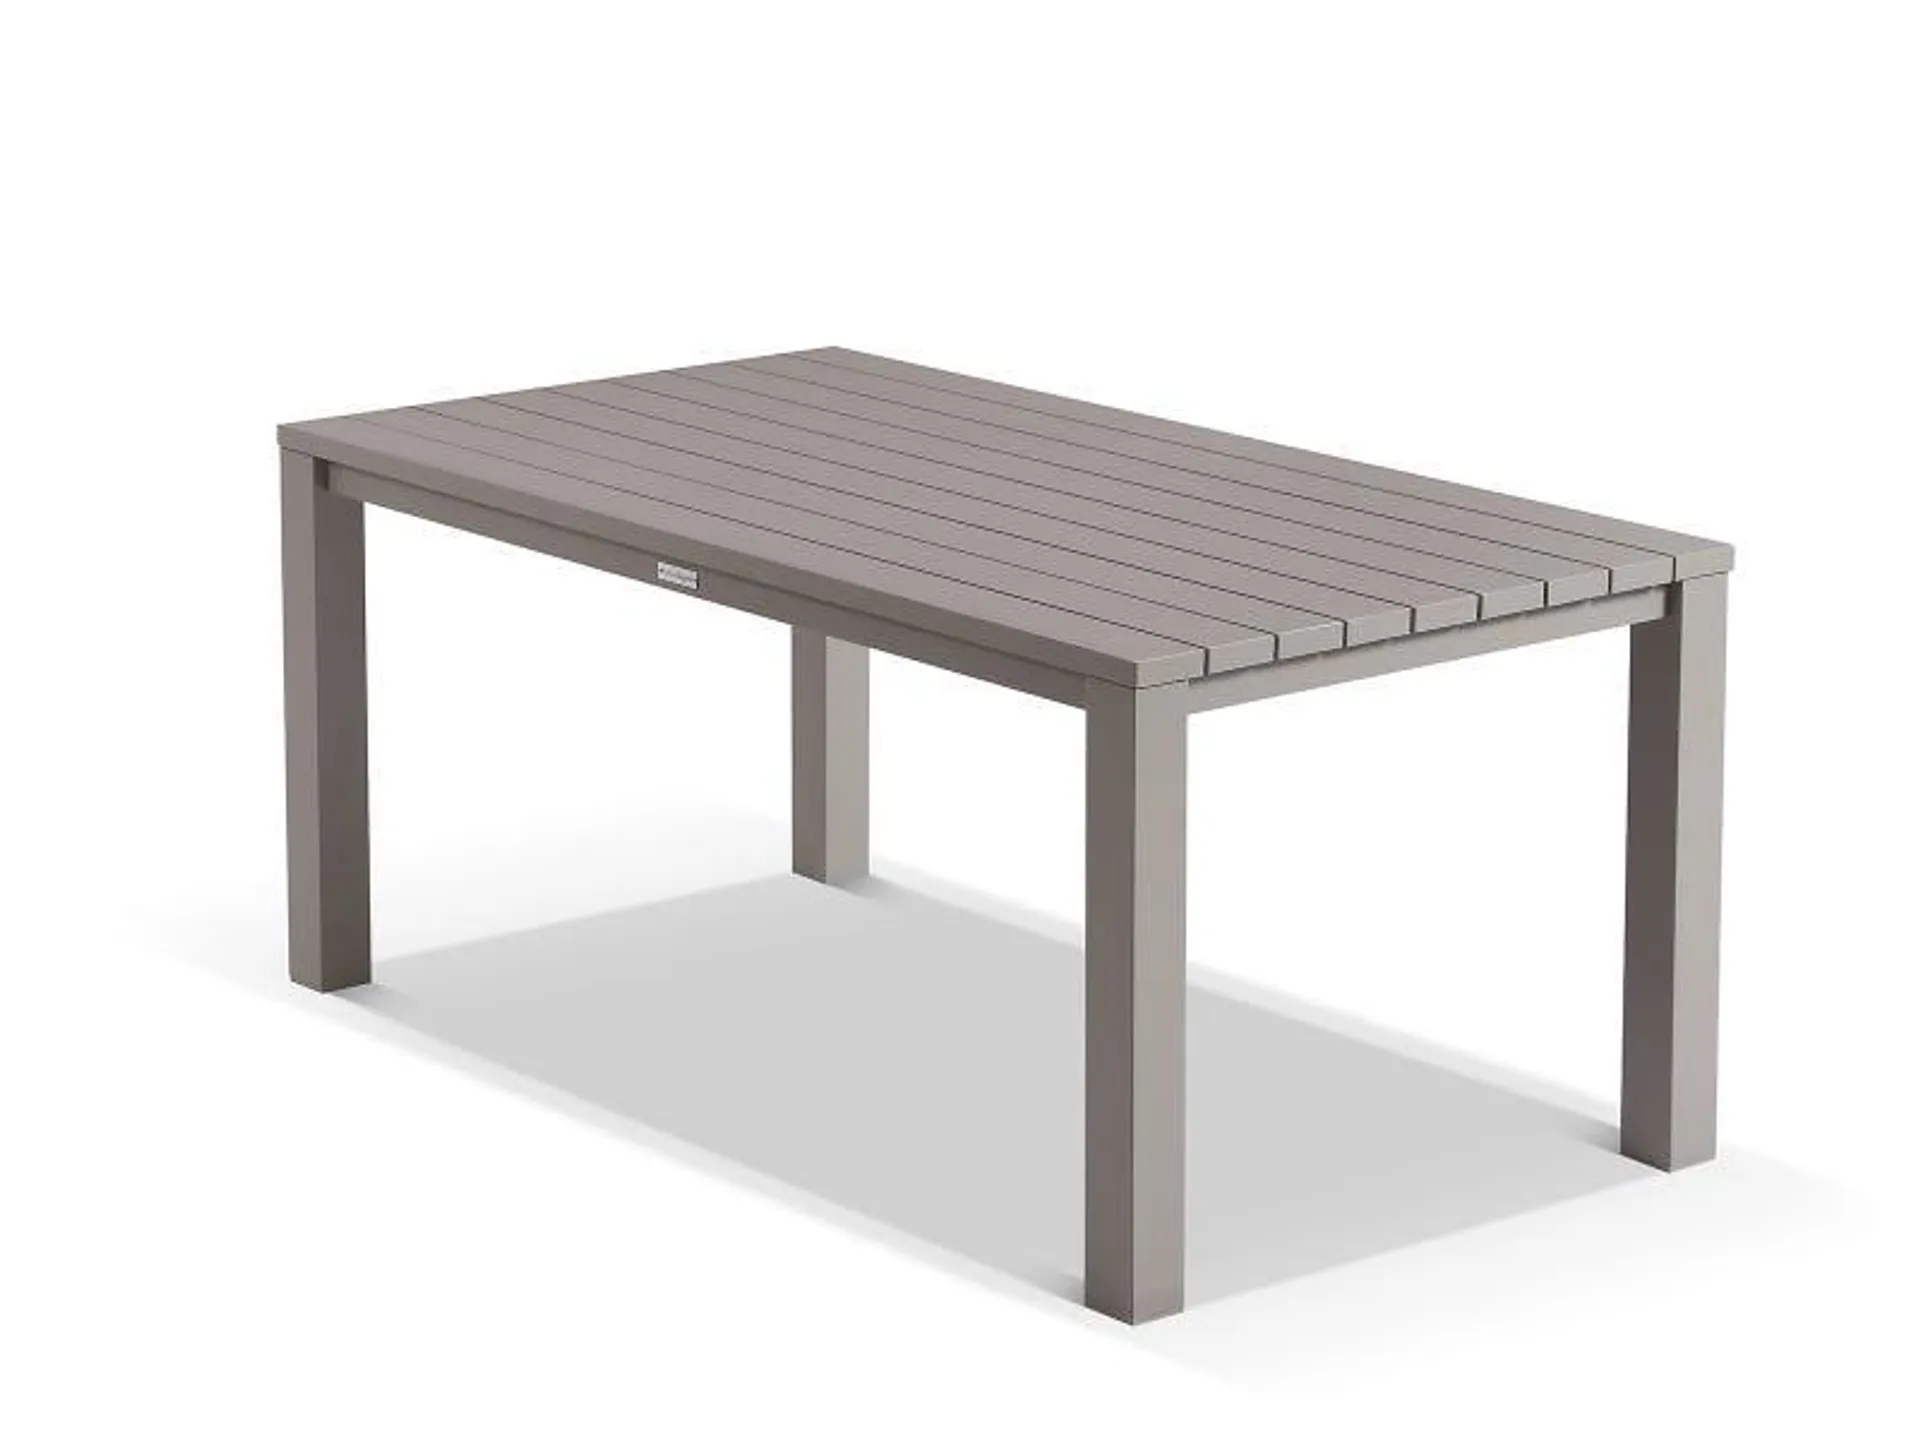 Adele Outdoor Dining Table - 165 x 95cm